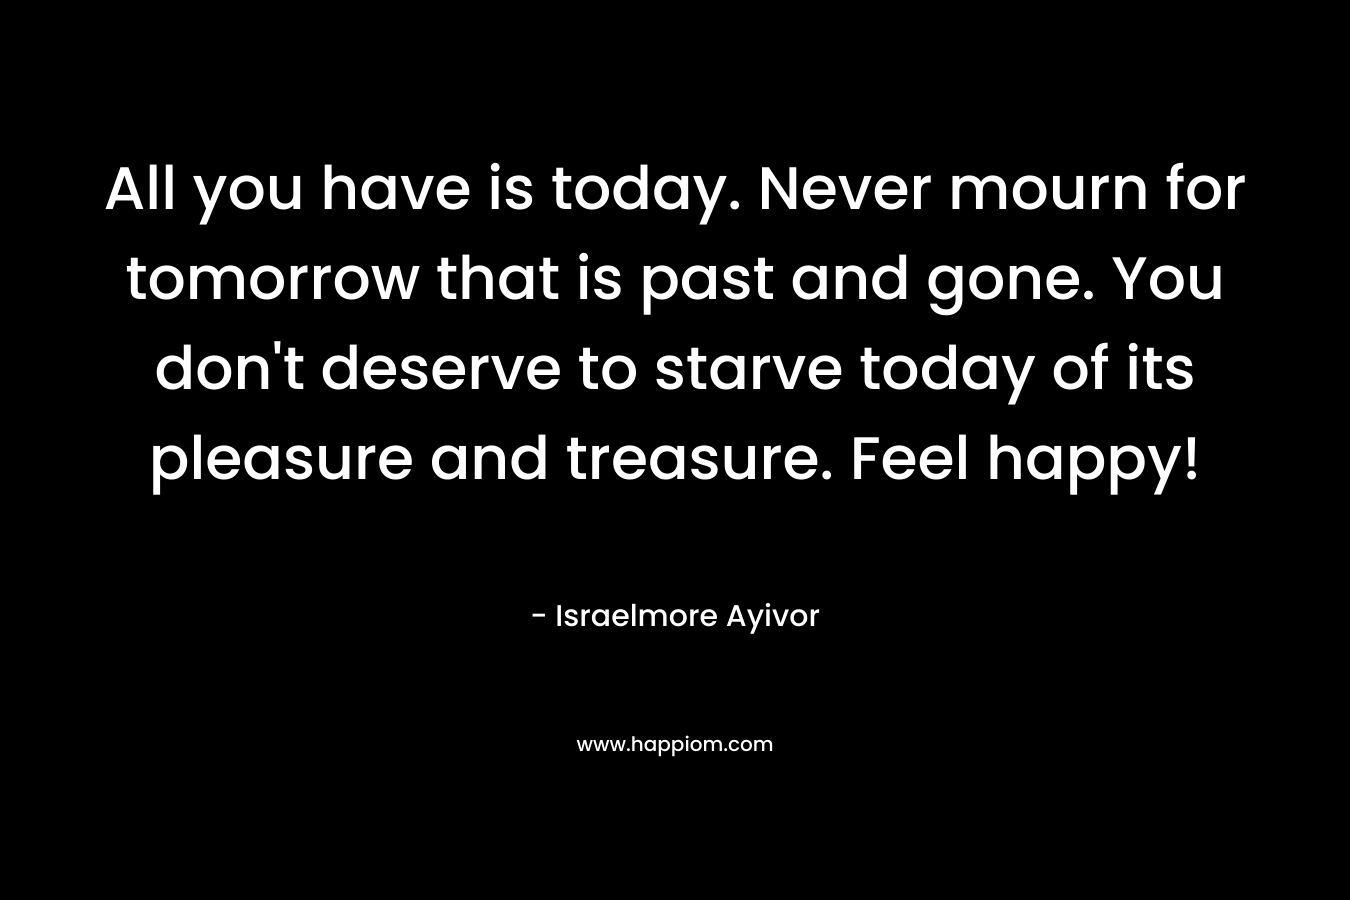 All you have is today. Never mourn for tomorrow that is past and gone. You don't deserve to starve today of its pleasure and treasure. Feel happy!